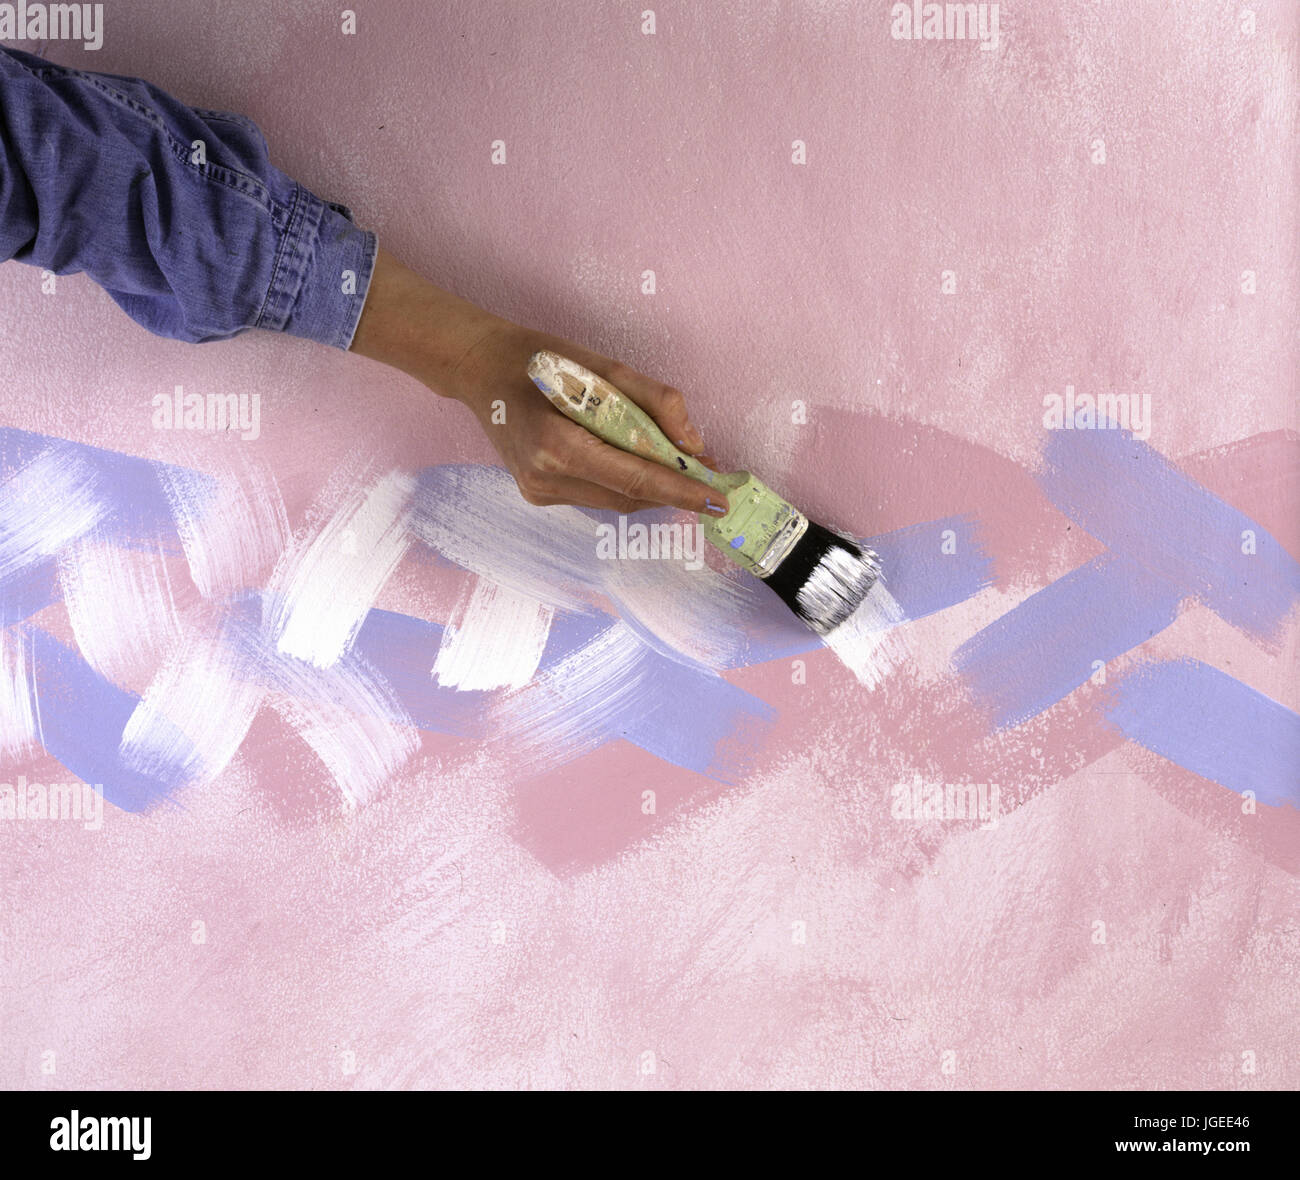 Step x step decorating: Handcreating paint effect on wall Stock Photo